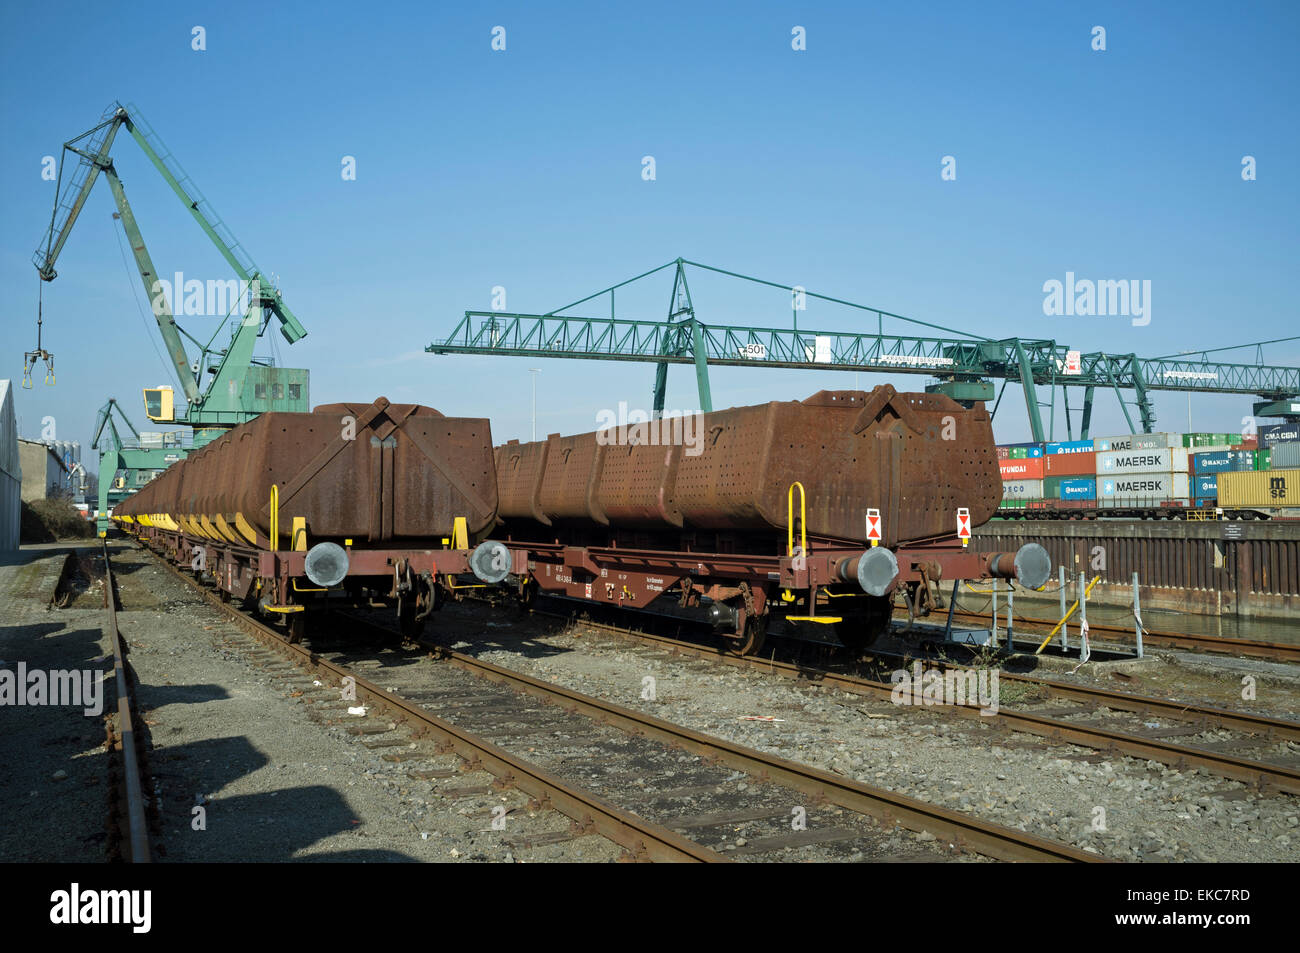 Railway wagons, freight terminal, Niehl, Cologne, Germany. Stock Photo